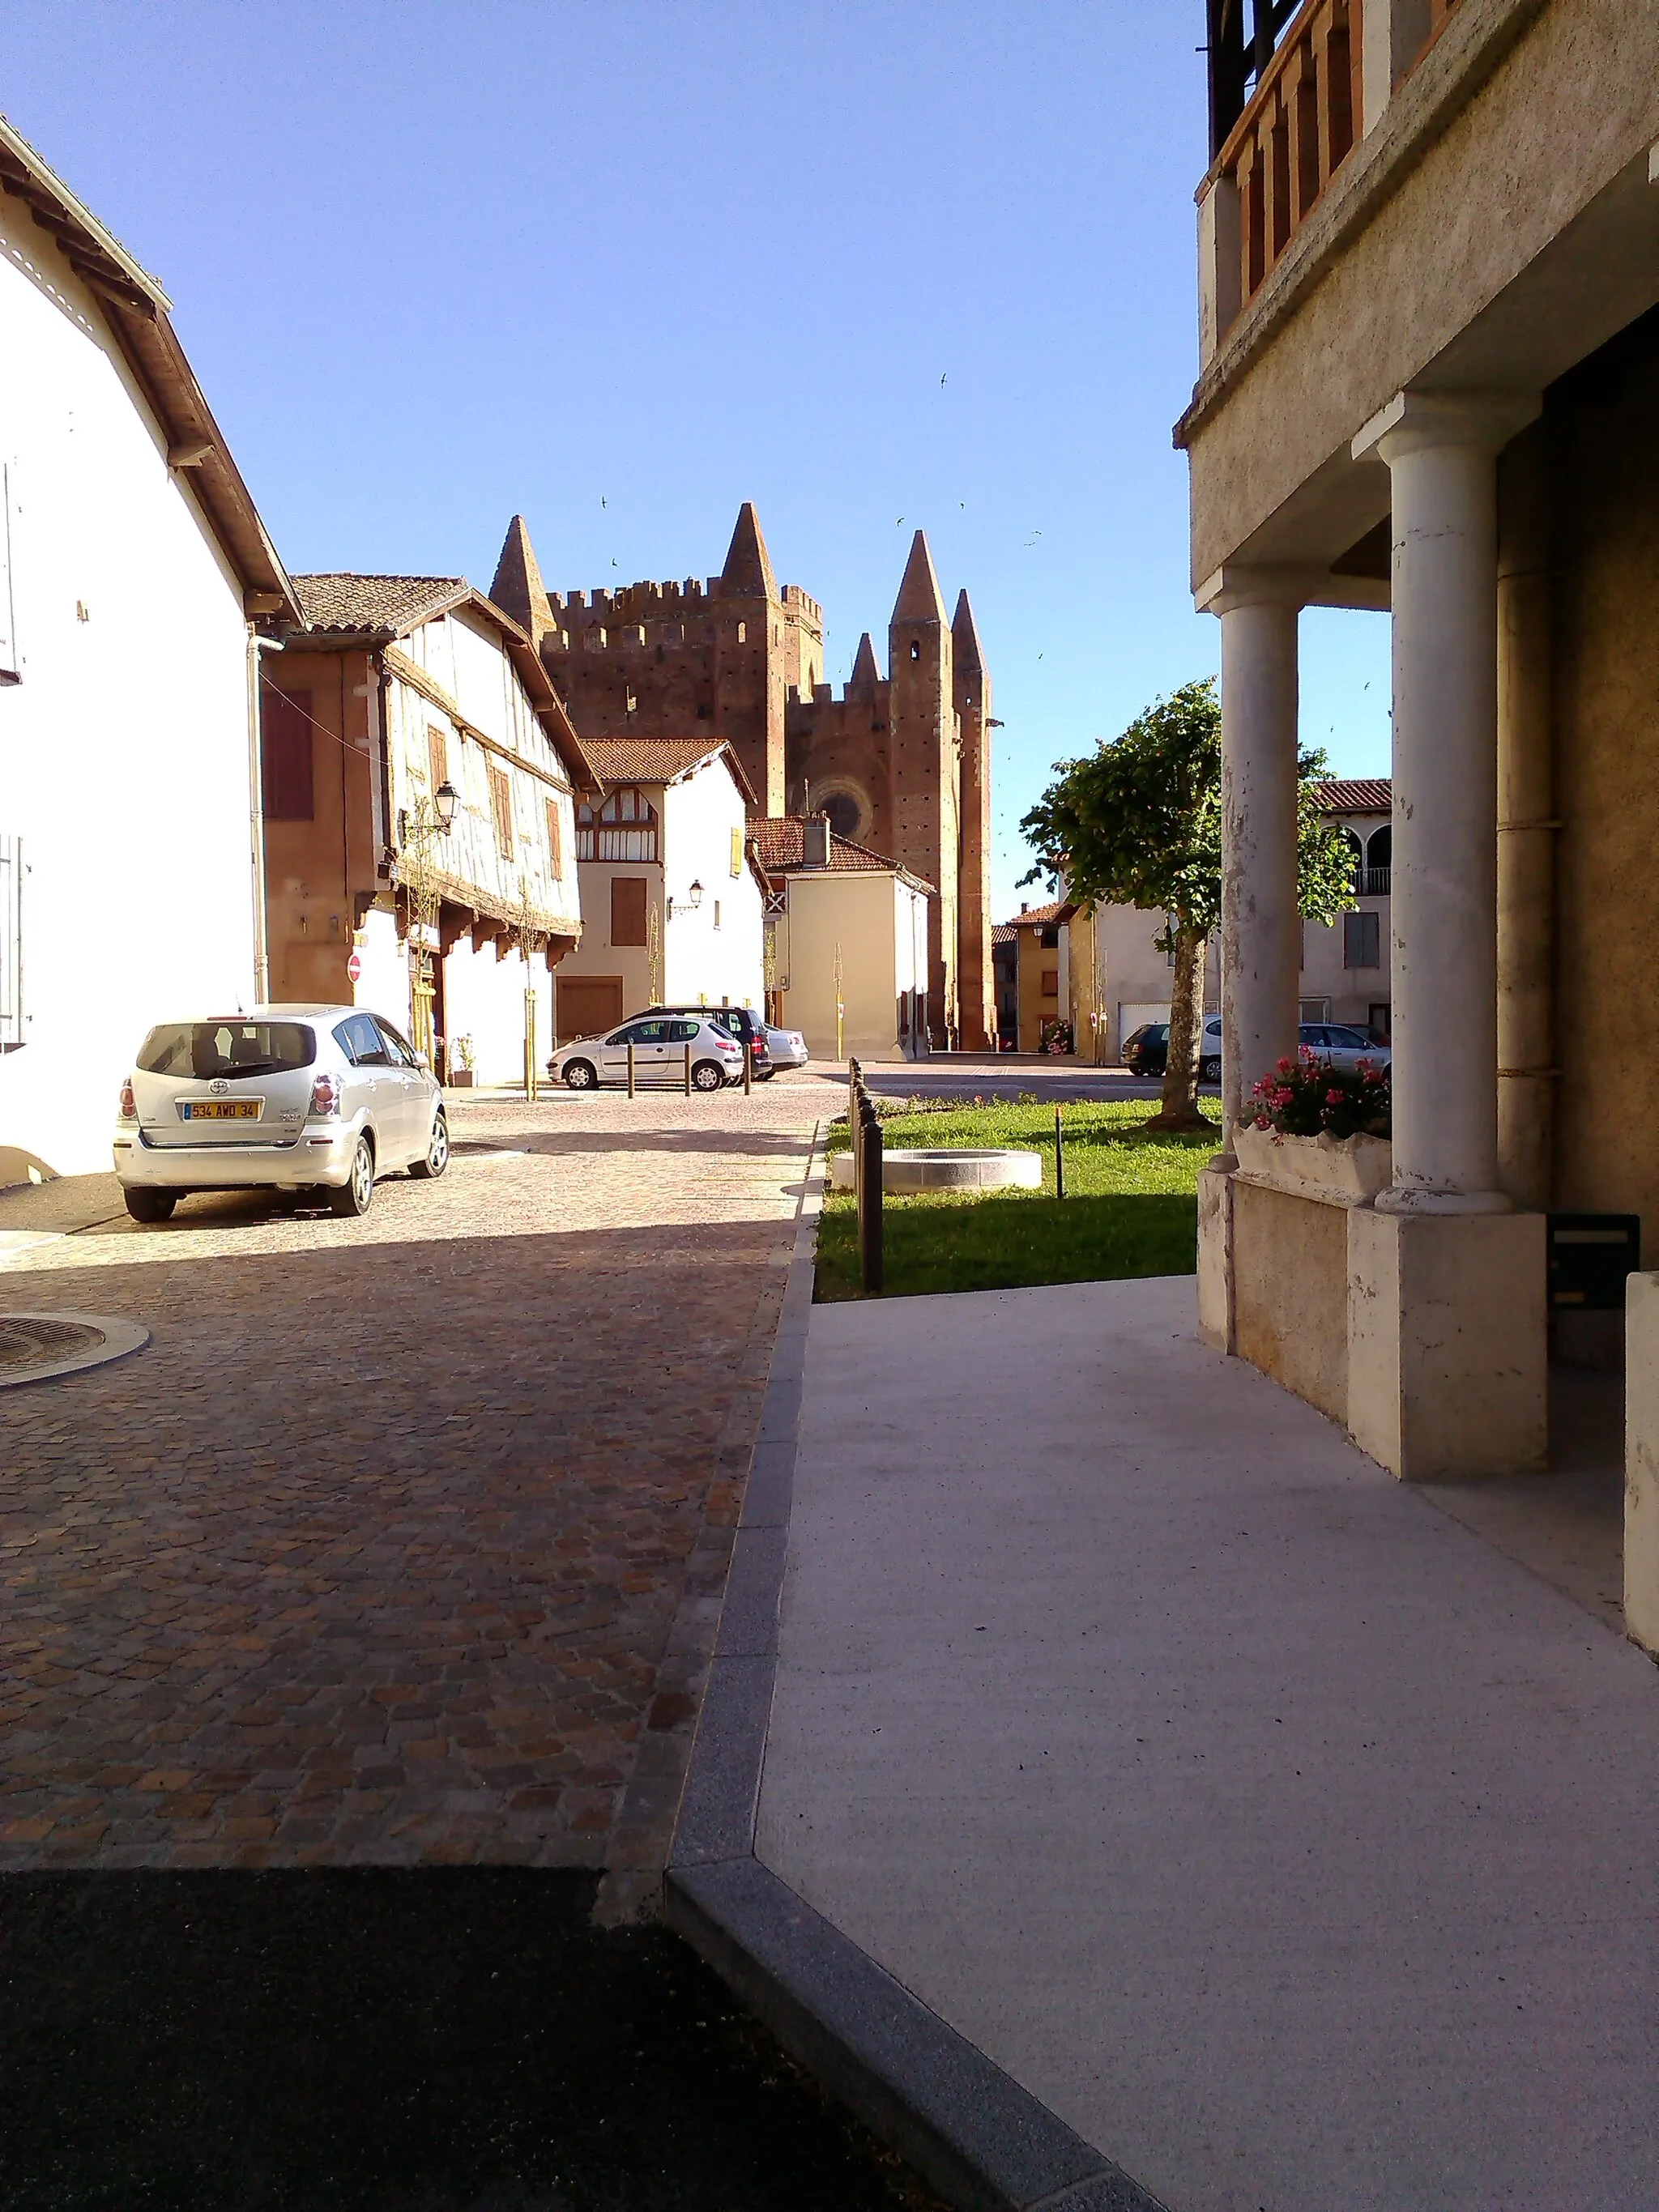 Photo showing: Traditional buildings in Simorre, Gers, France.